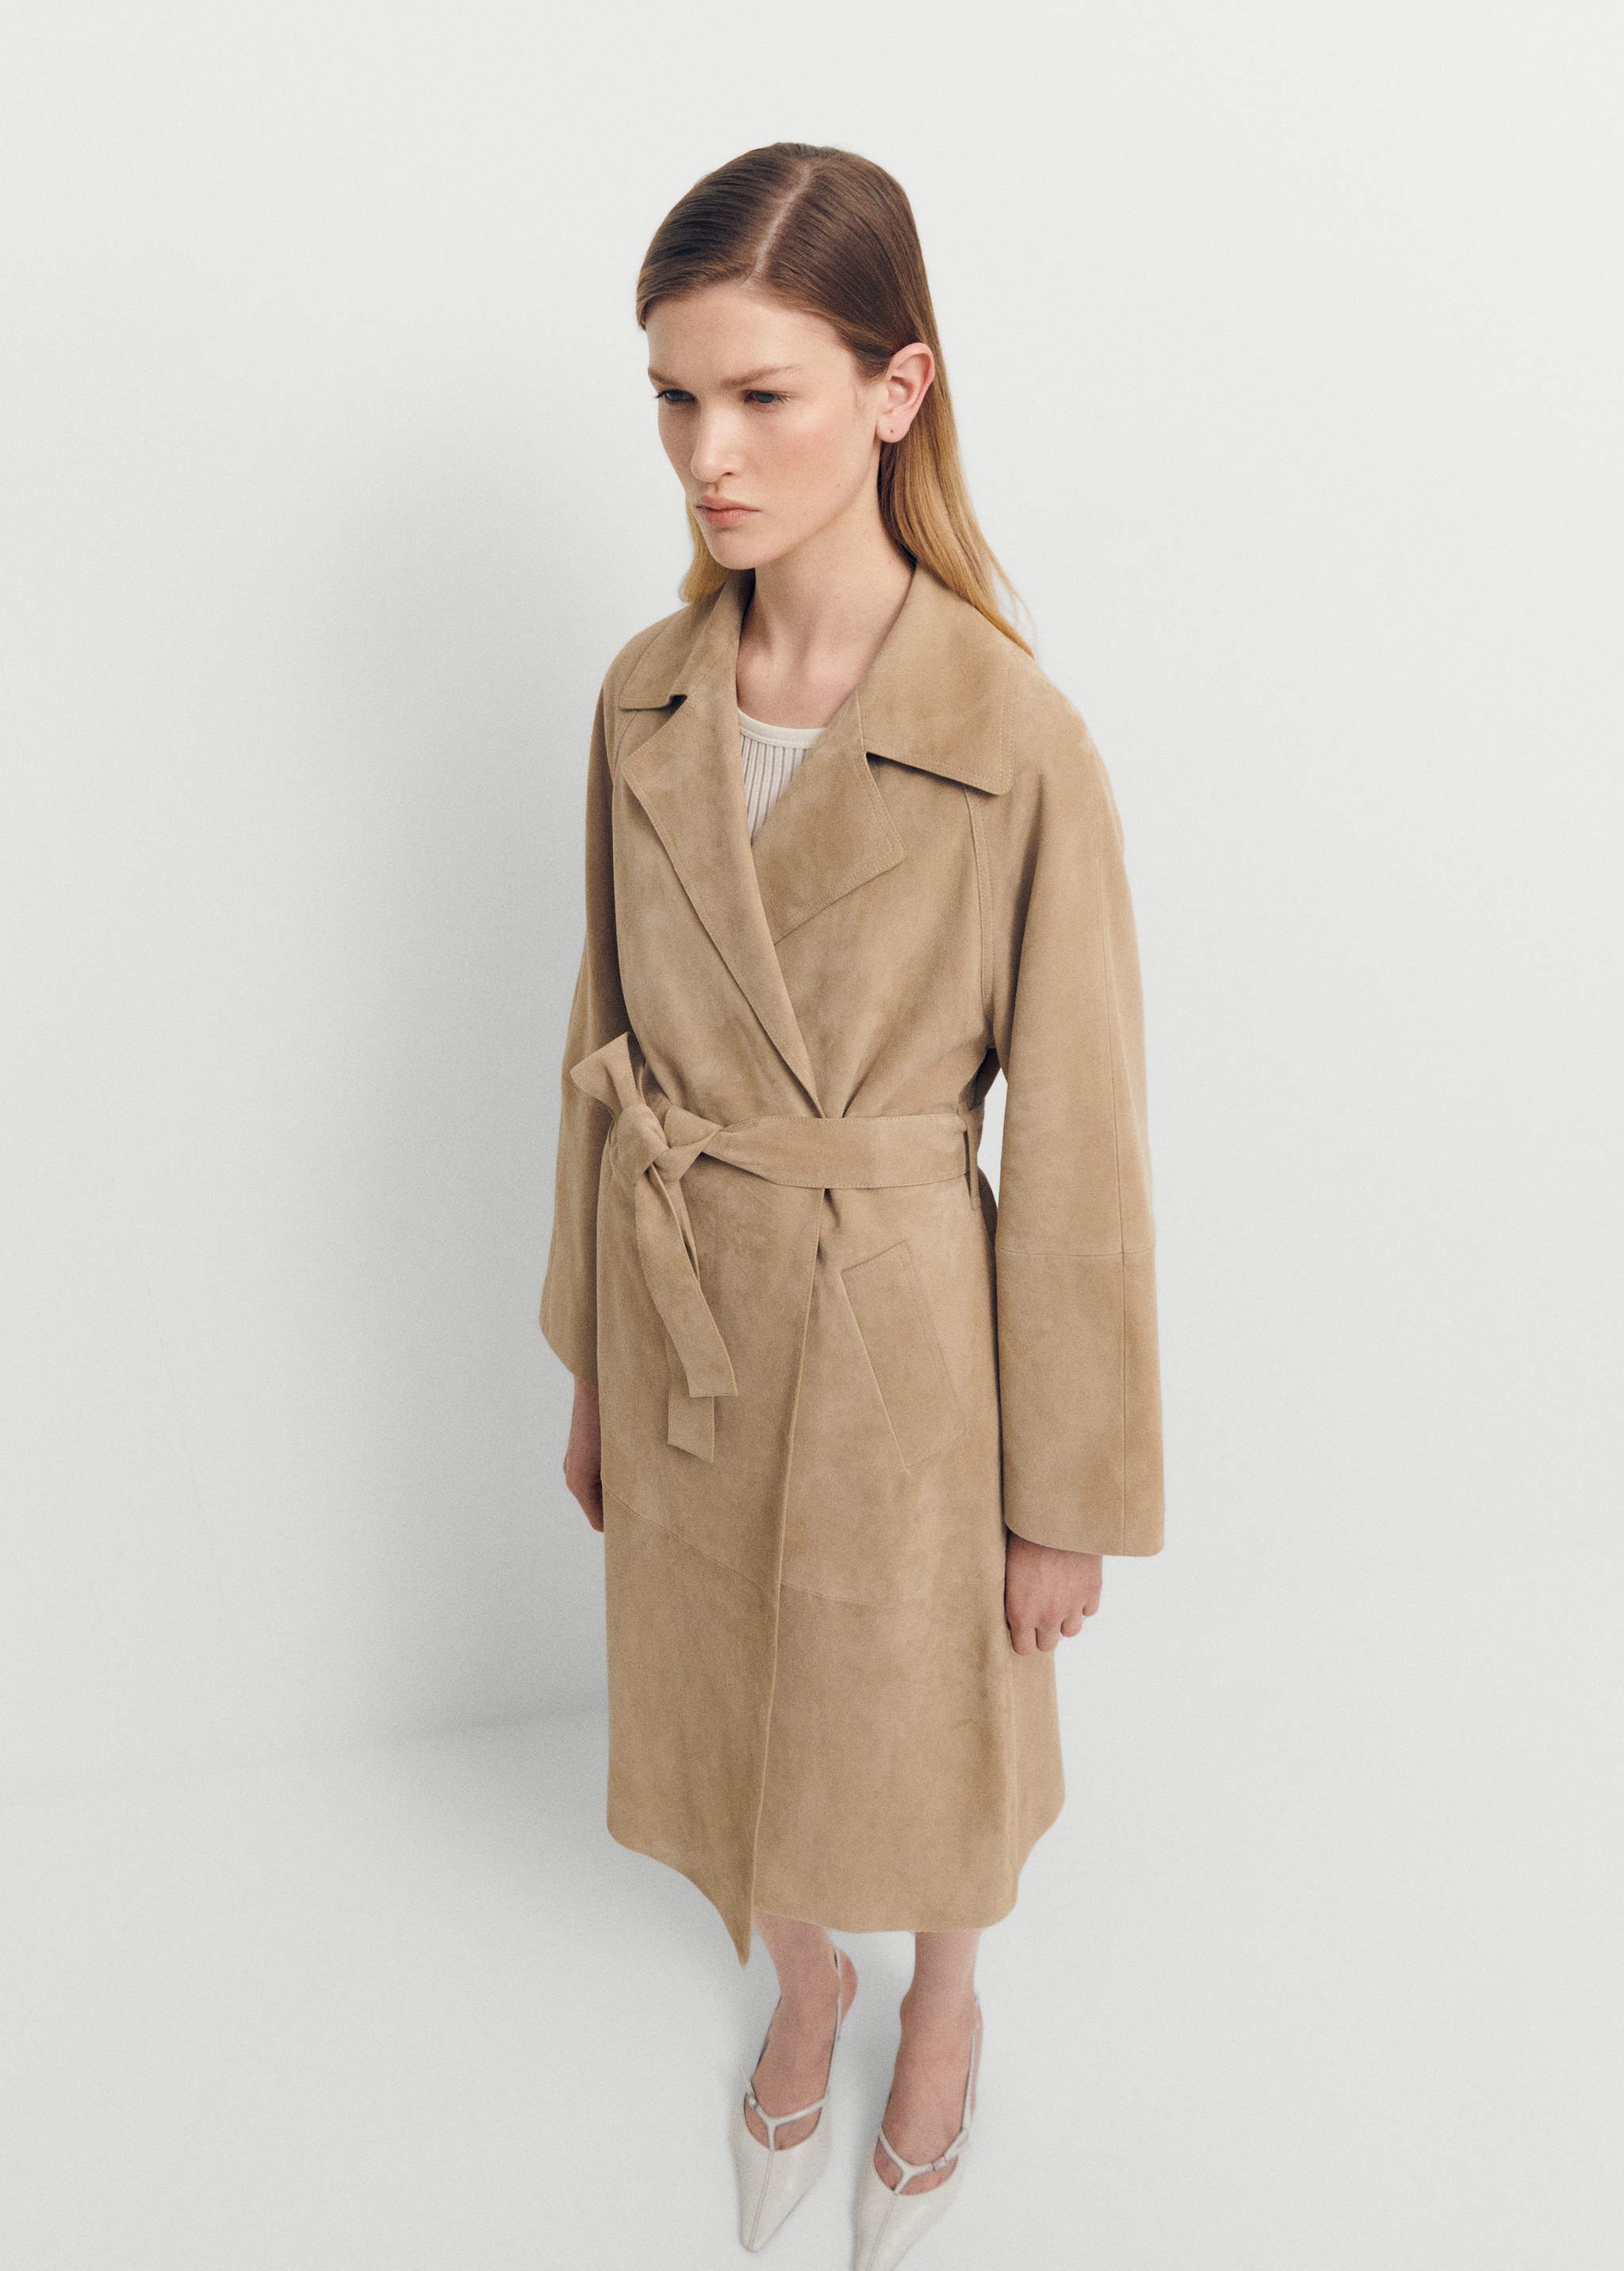 100% suede trench coat - General plane